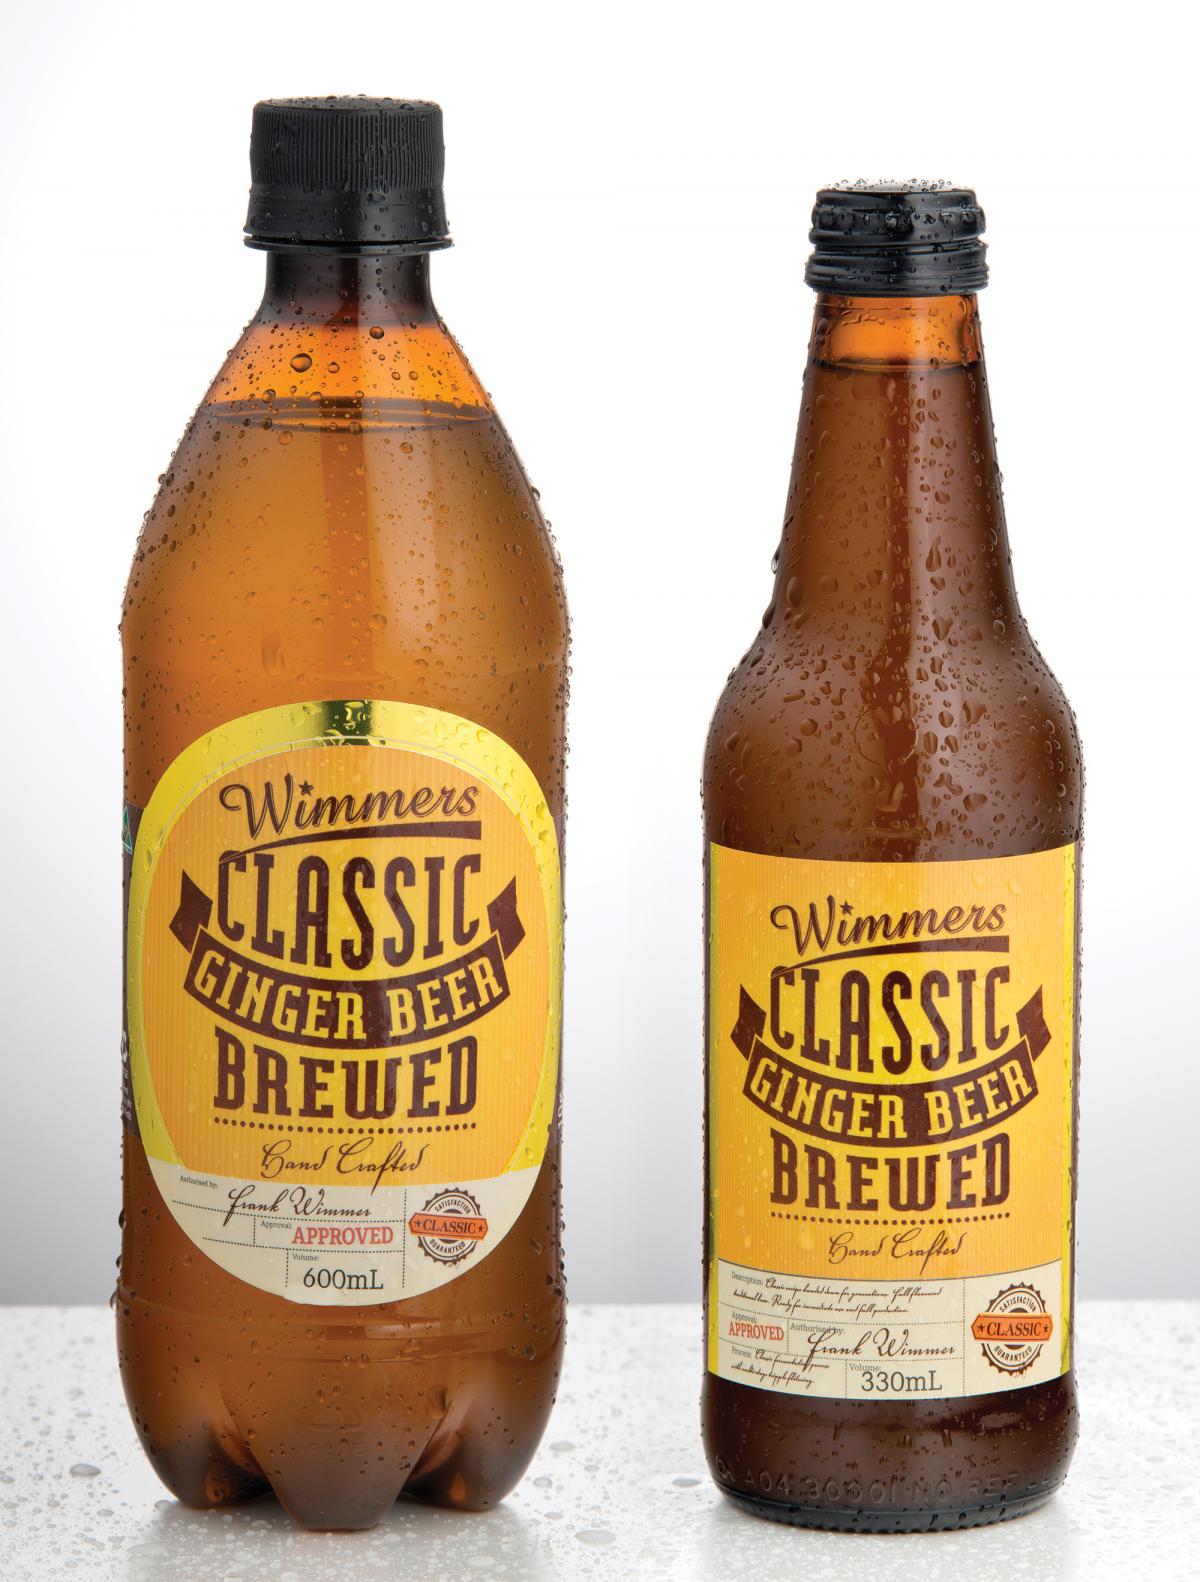 Wimmers Classic Ginger Beer